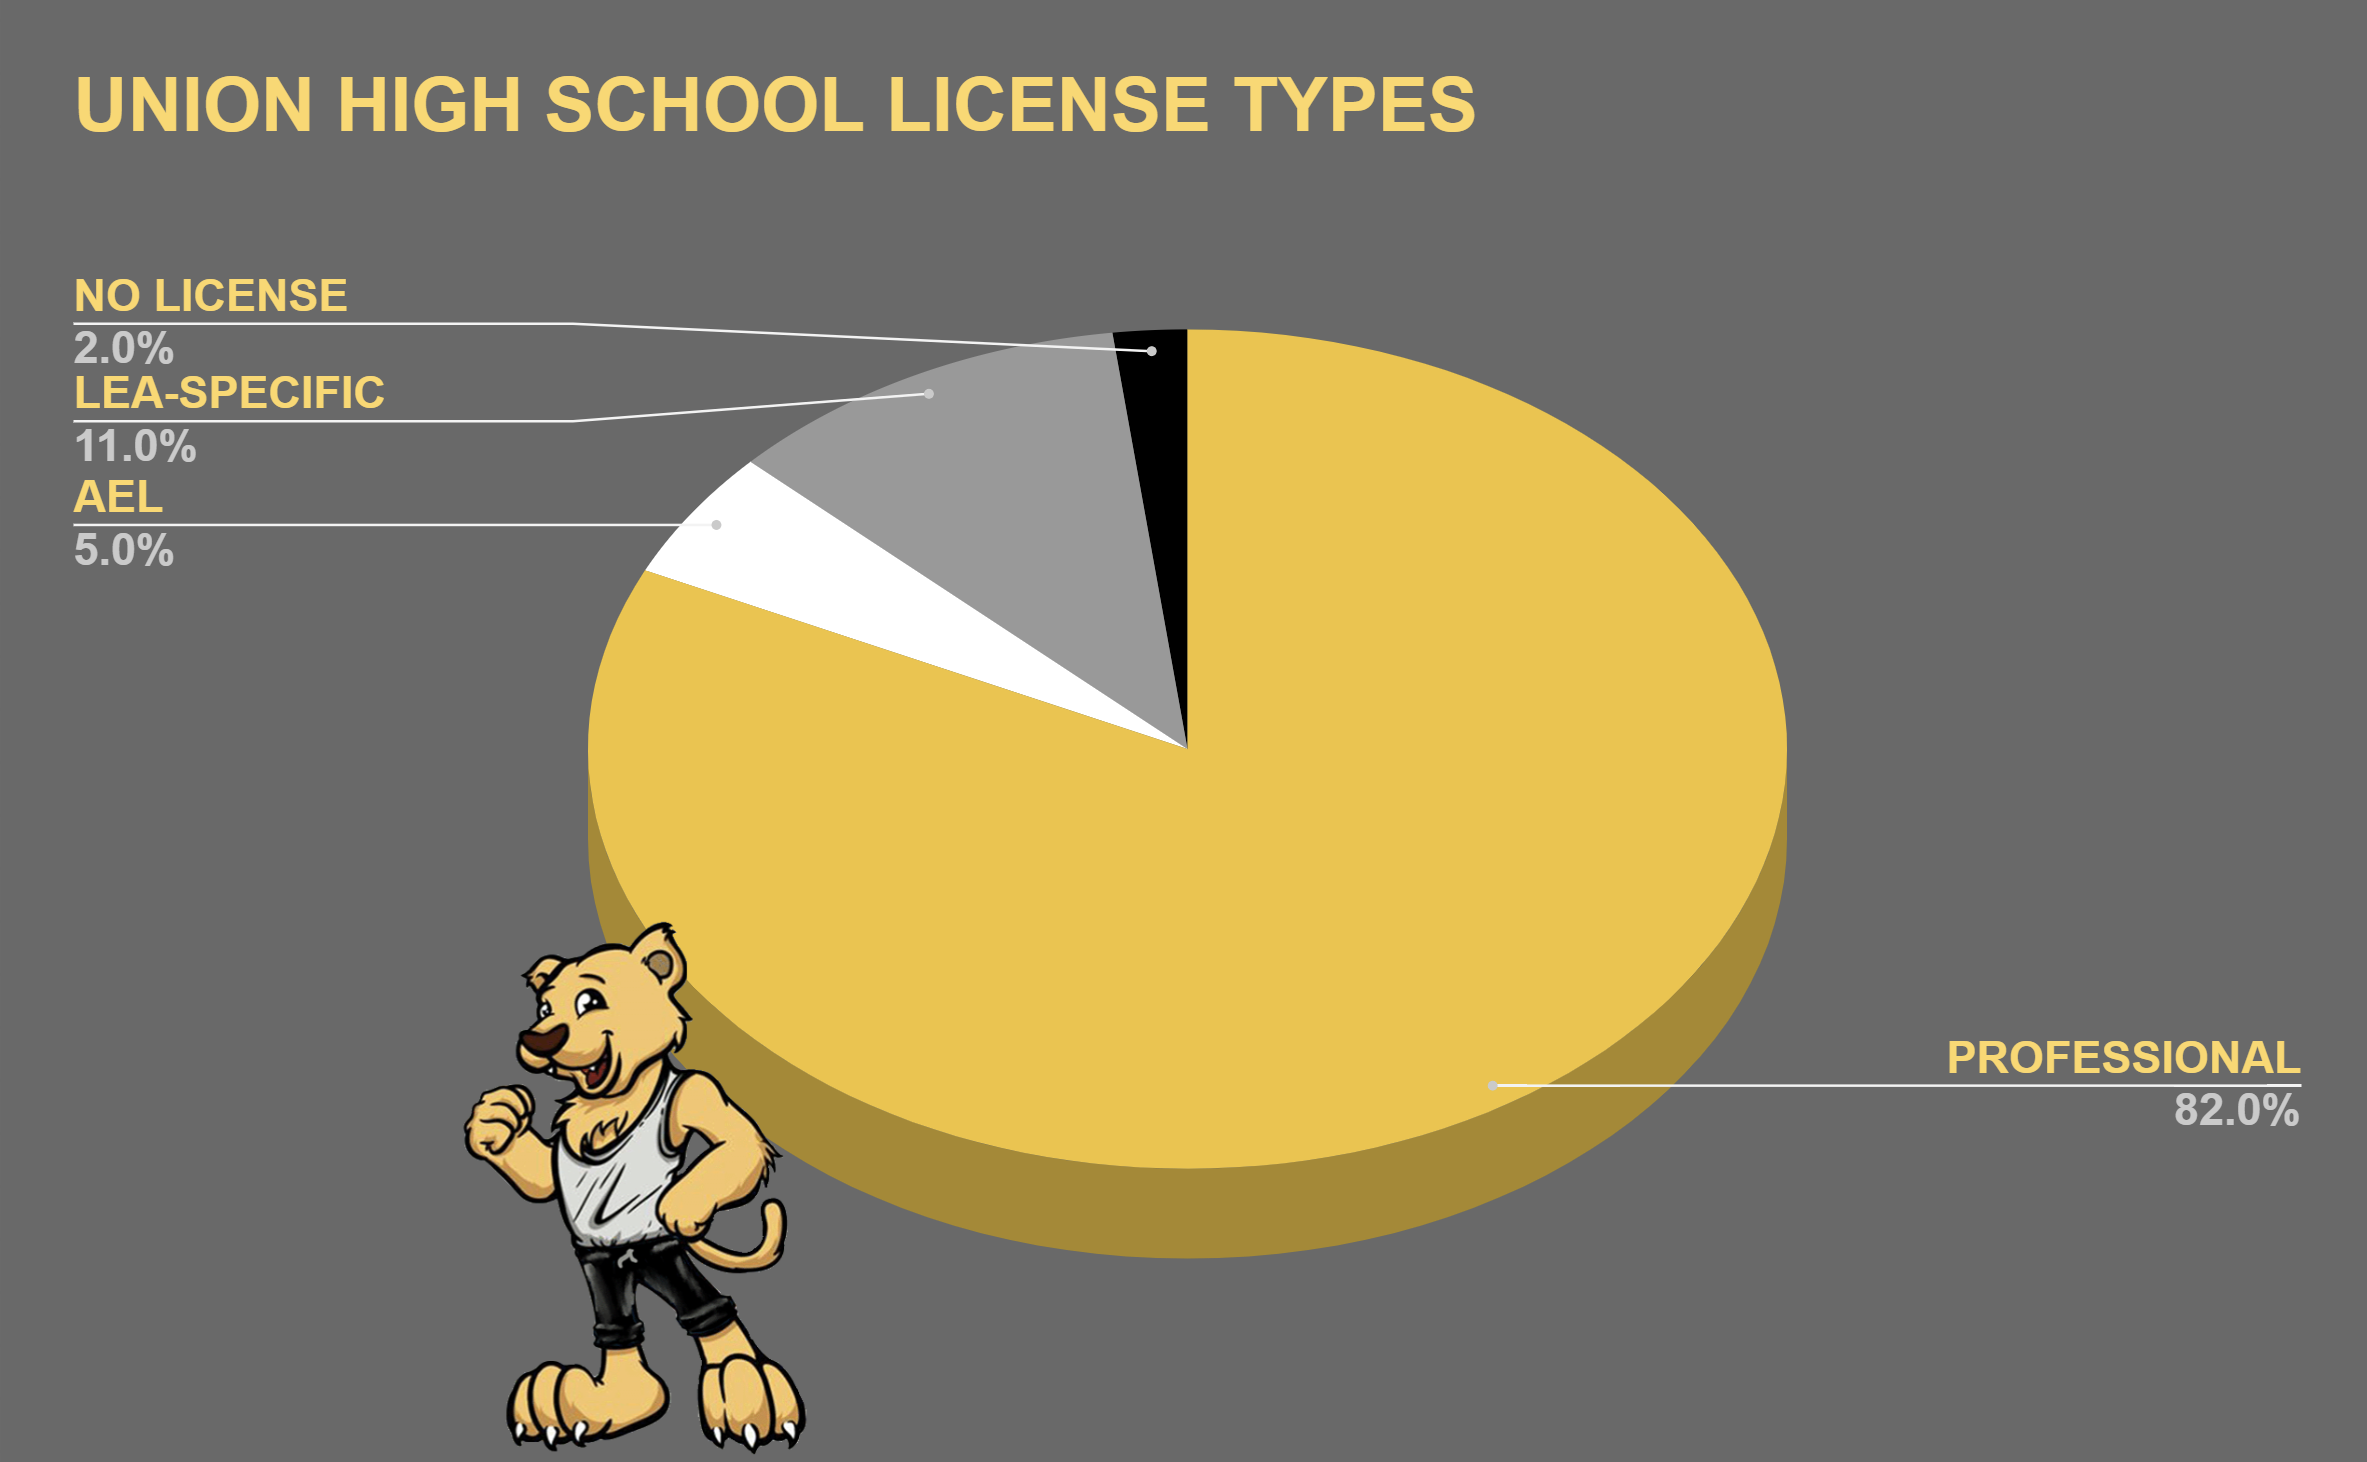 UHS License Types chart